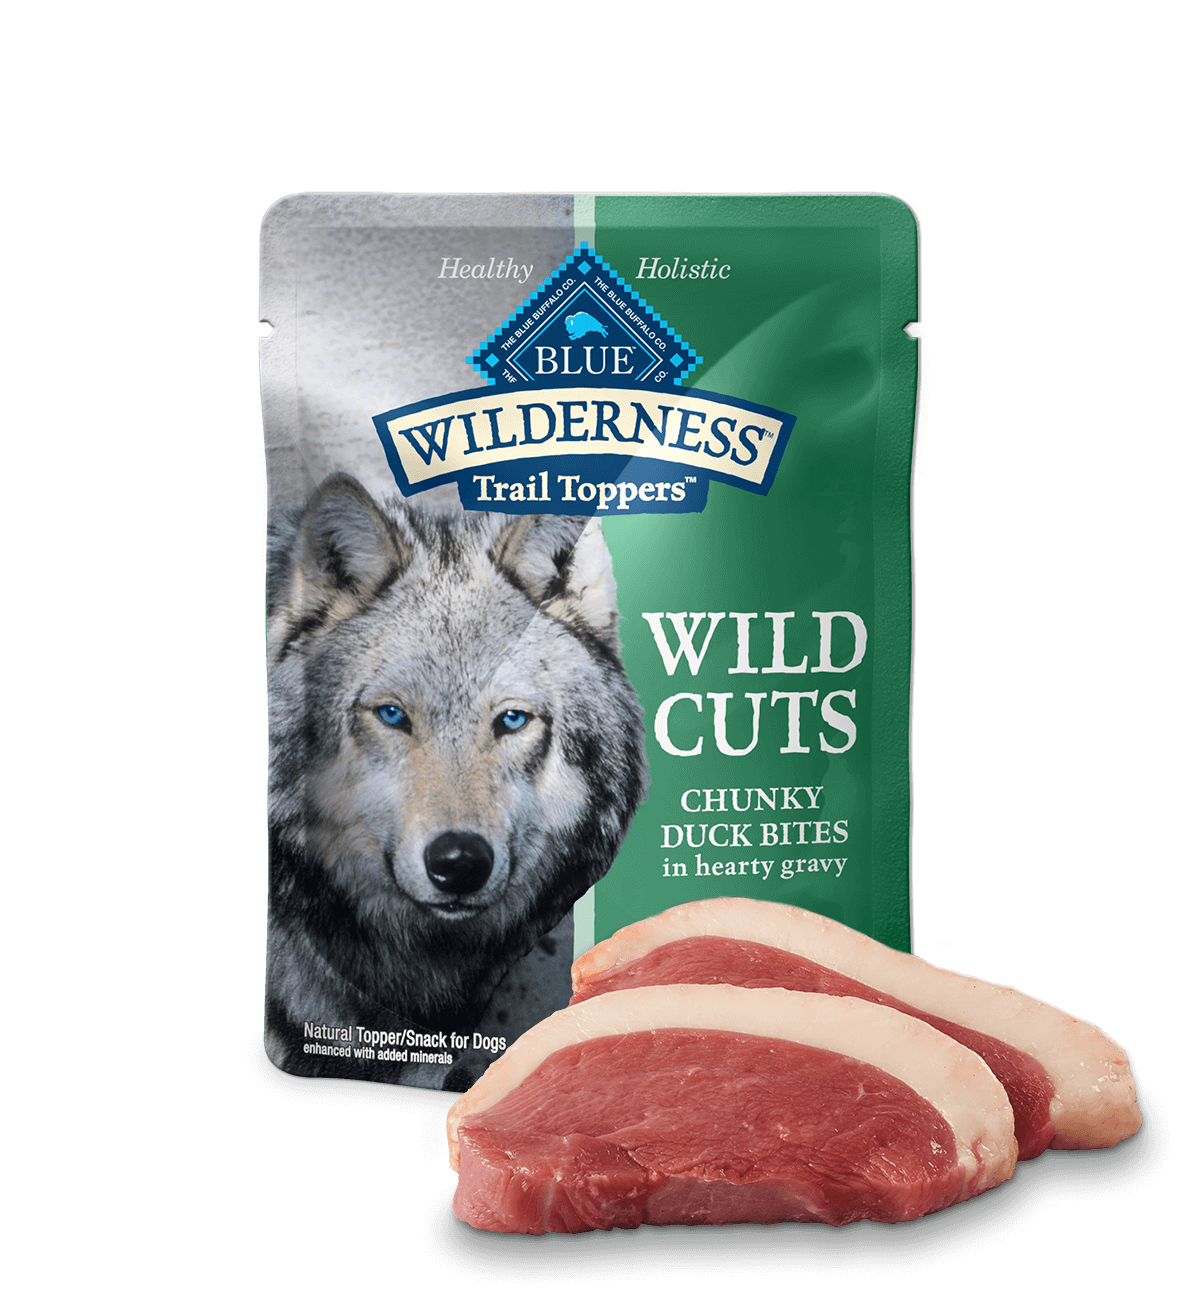 Blue Buffalo - Wilderness Wild Cuts Trail Toppers Chunky Duck Bites in Hearty Gravy